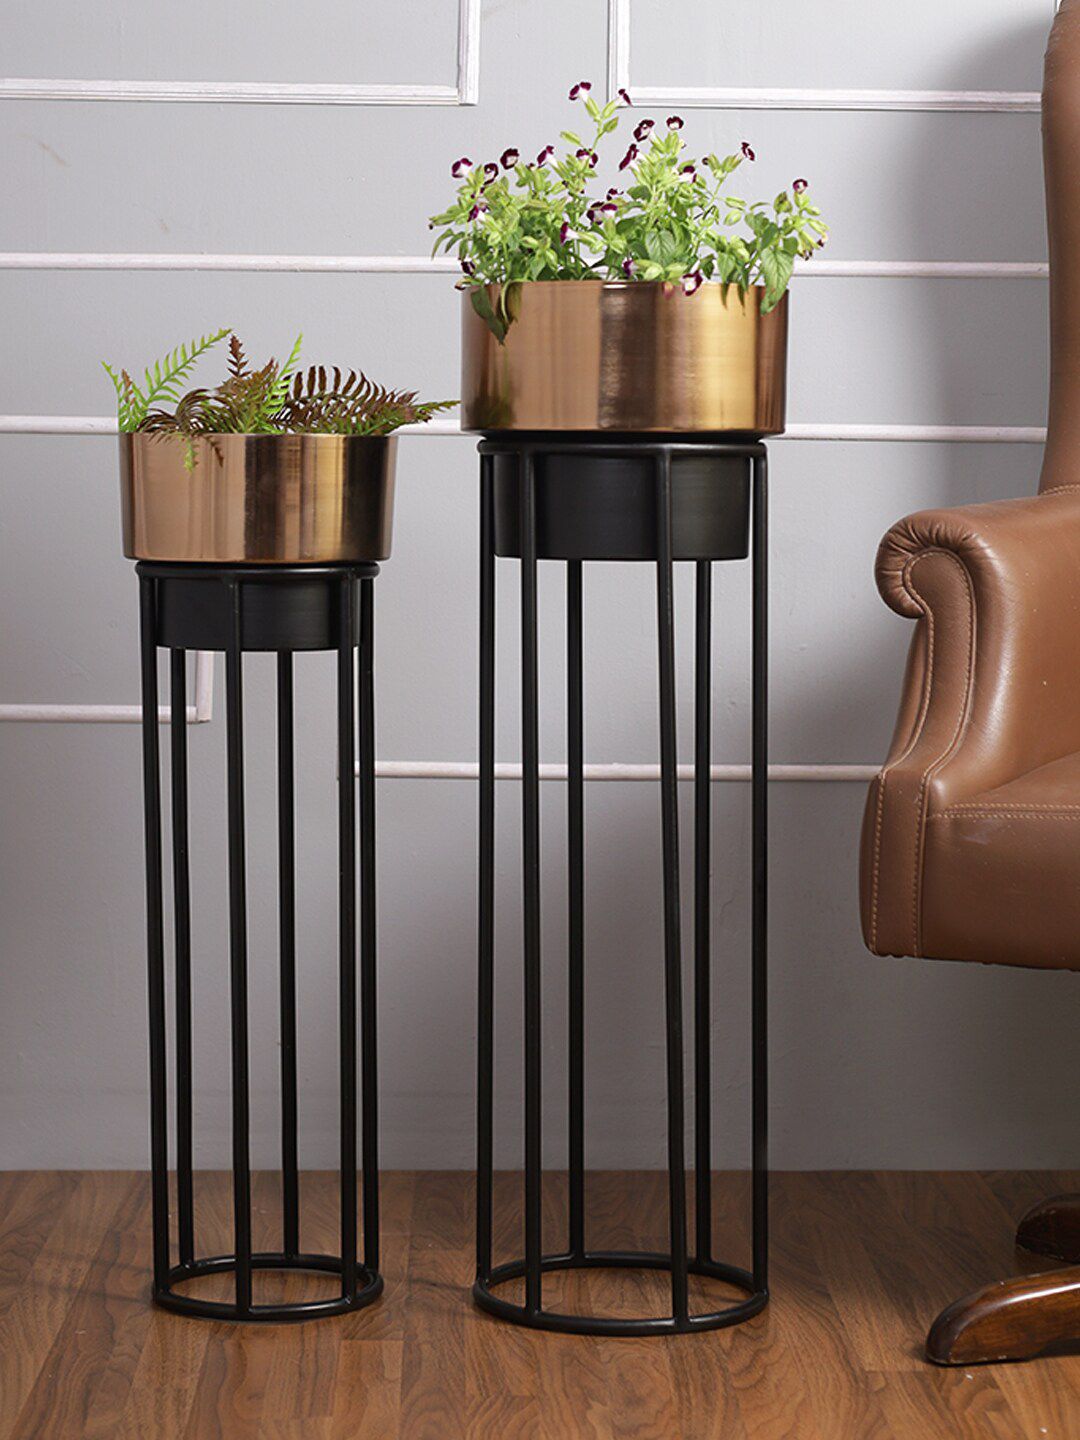 Aapno Rajasthan Set Of 2 Metal Planters With Stand Price in India